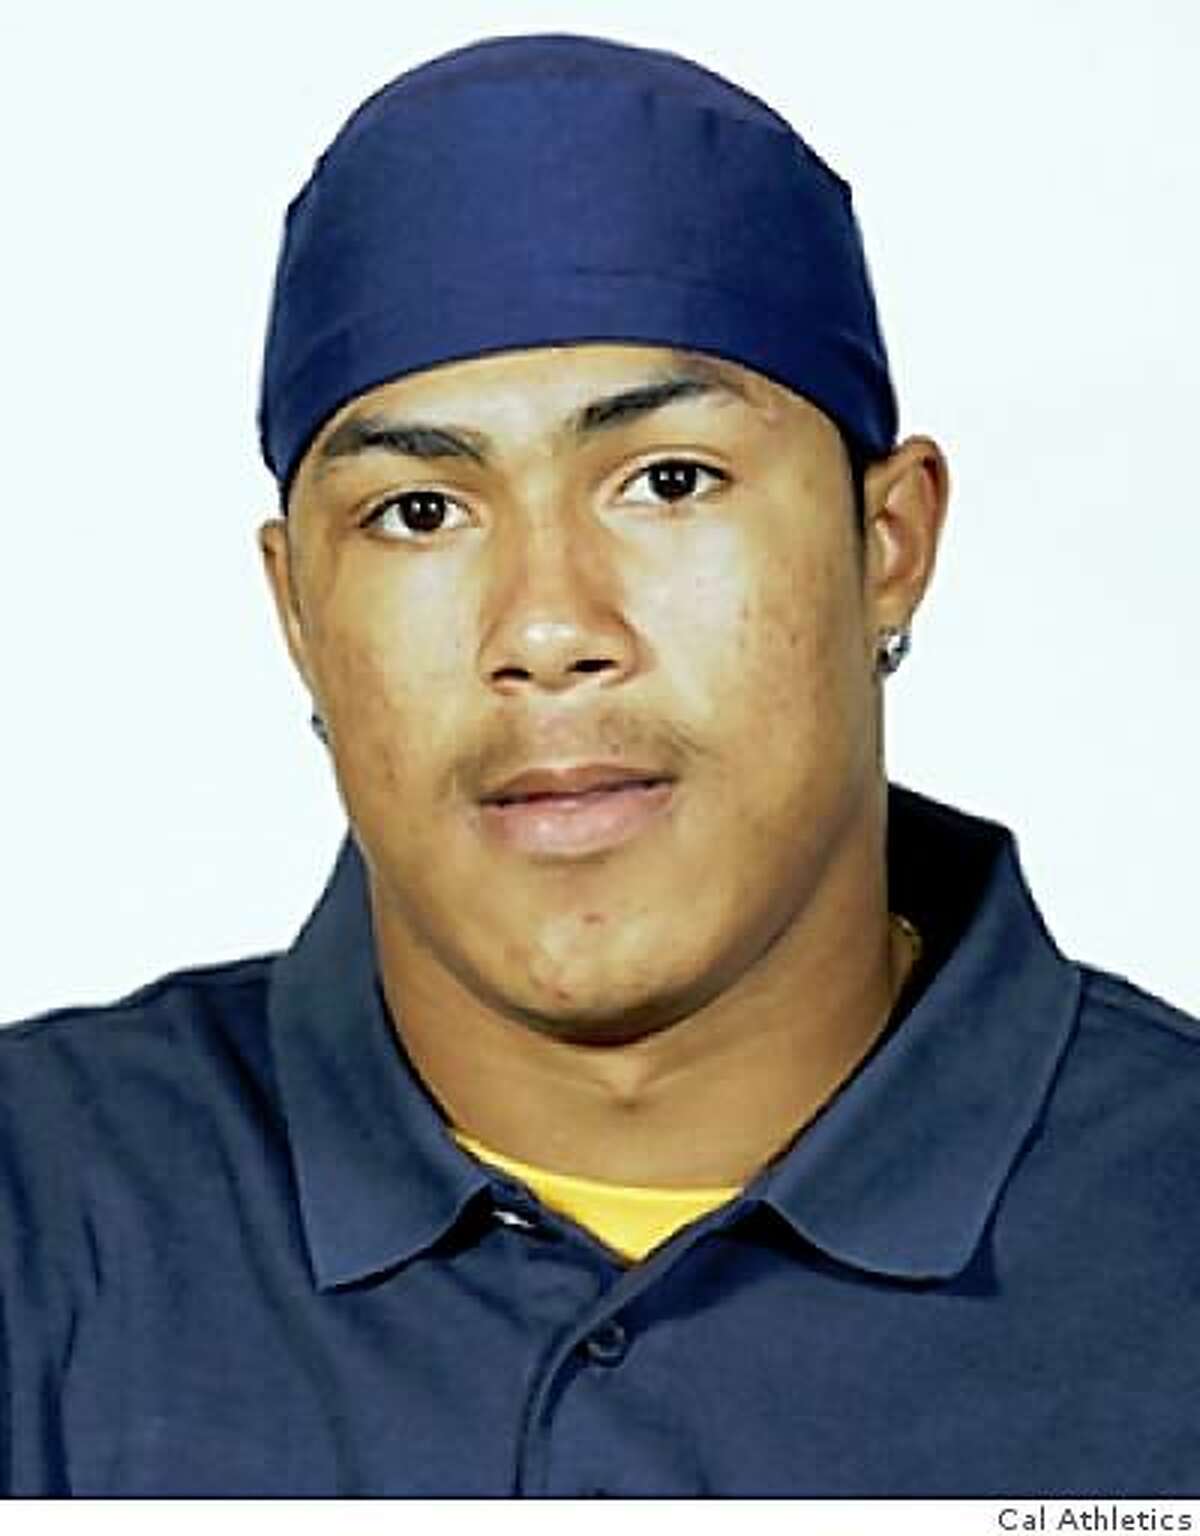 Gary Doxy, a 21-year-old former Cal football player, was arrested and charged October 20, 2008 in connection with a September 2008 robbery of two Cal crew members at the Clark Kerr Campus, a residence-hall complex just southeast of UC Berkeley and home to many of the school's student athletes.